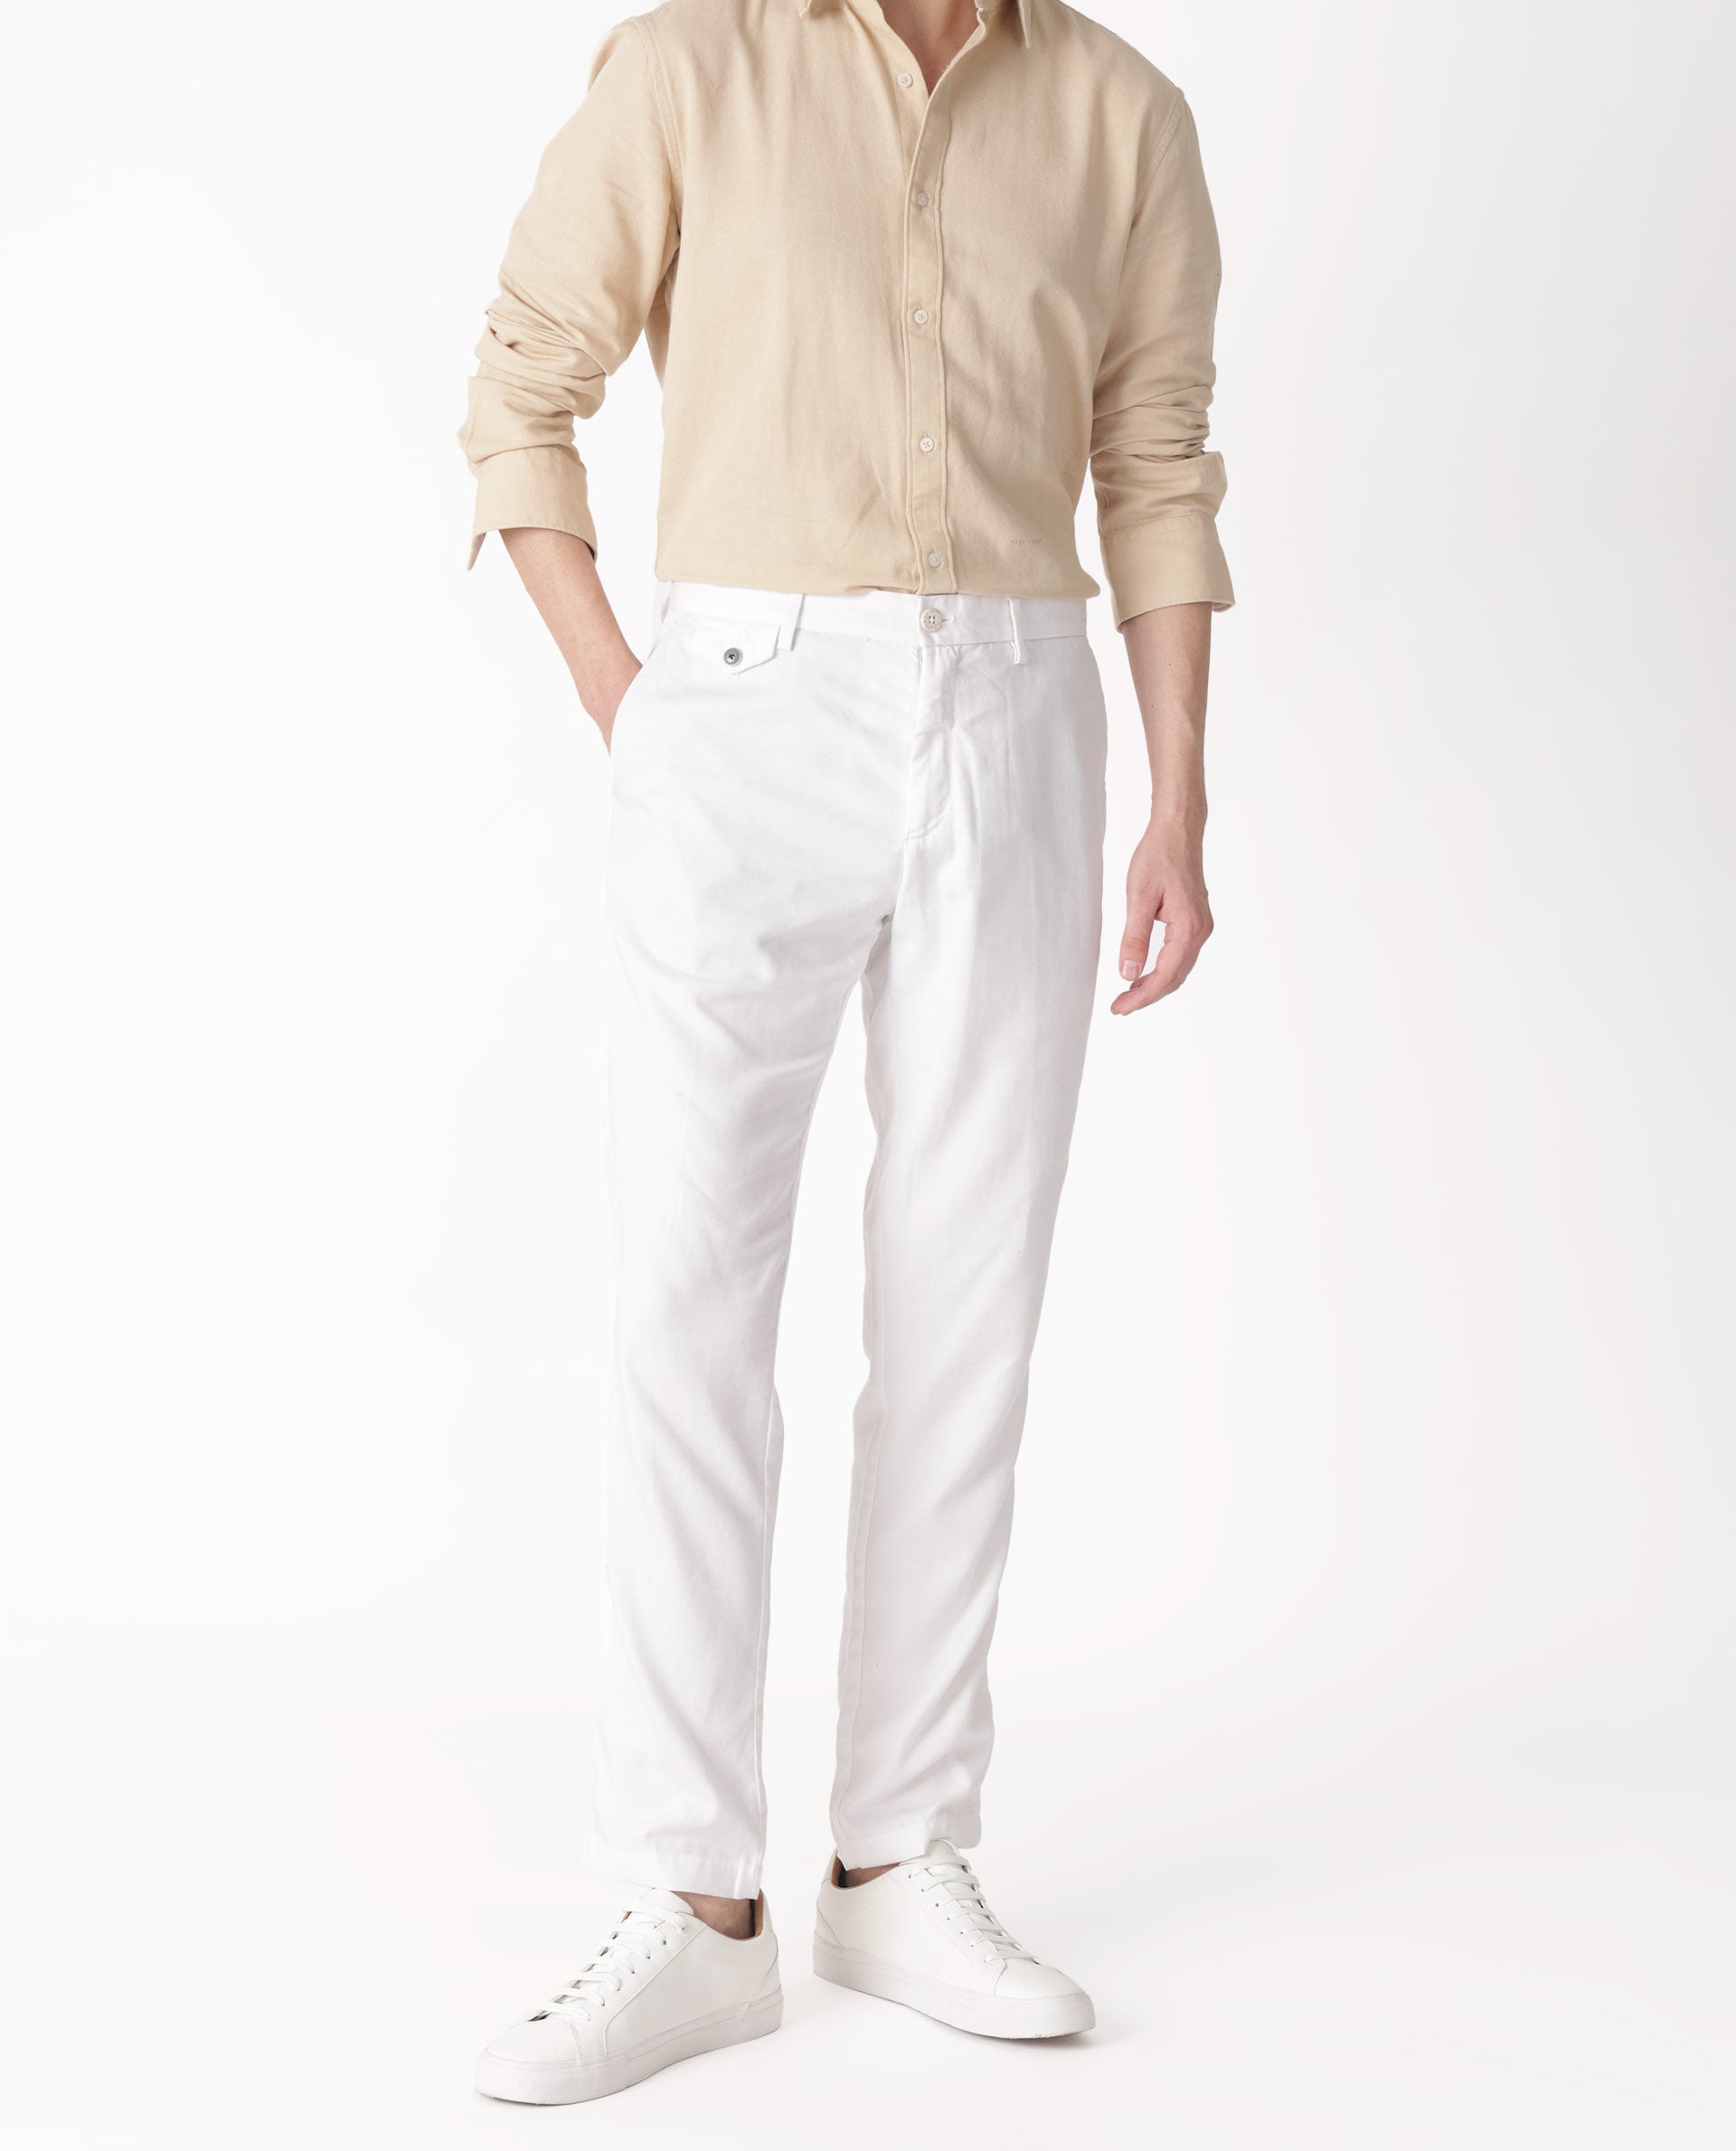 Buy Trousers For Men | Casual Pants For Men Online In India